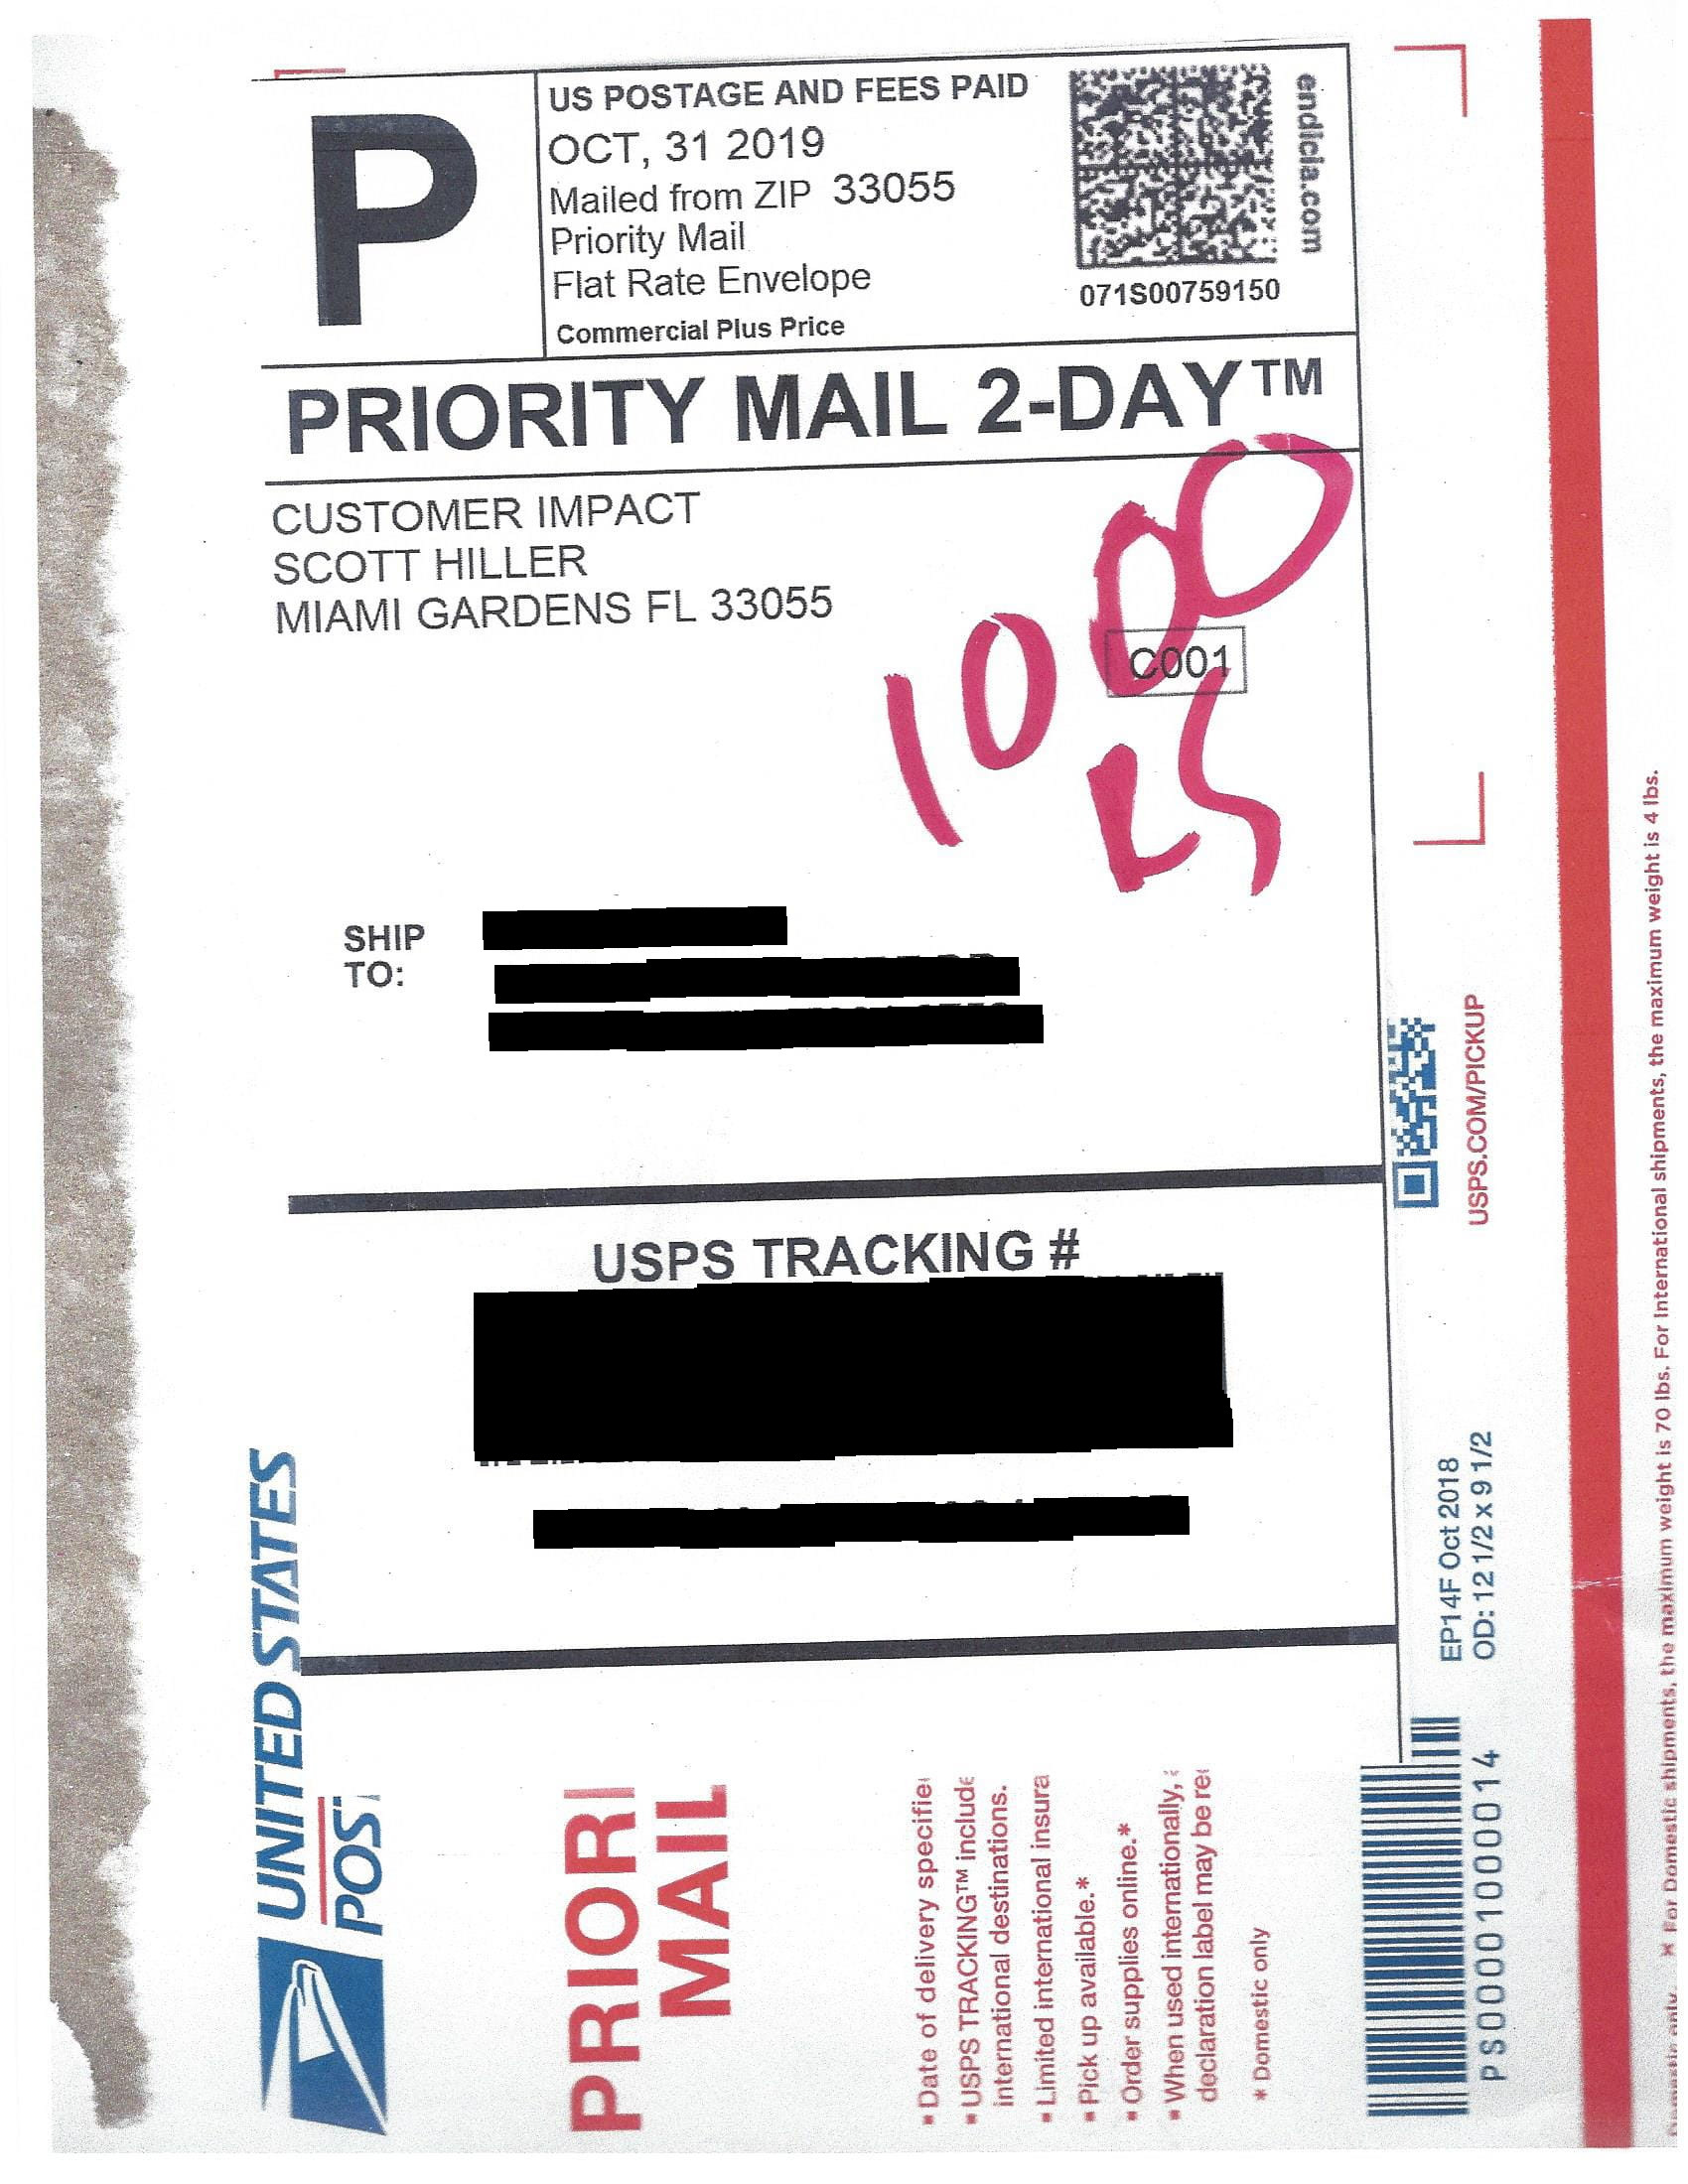 Mail Scam Materials - Package Mailer